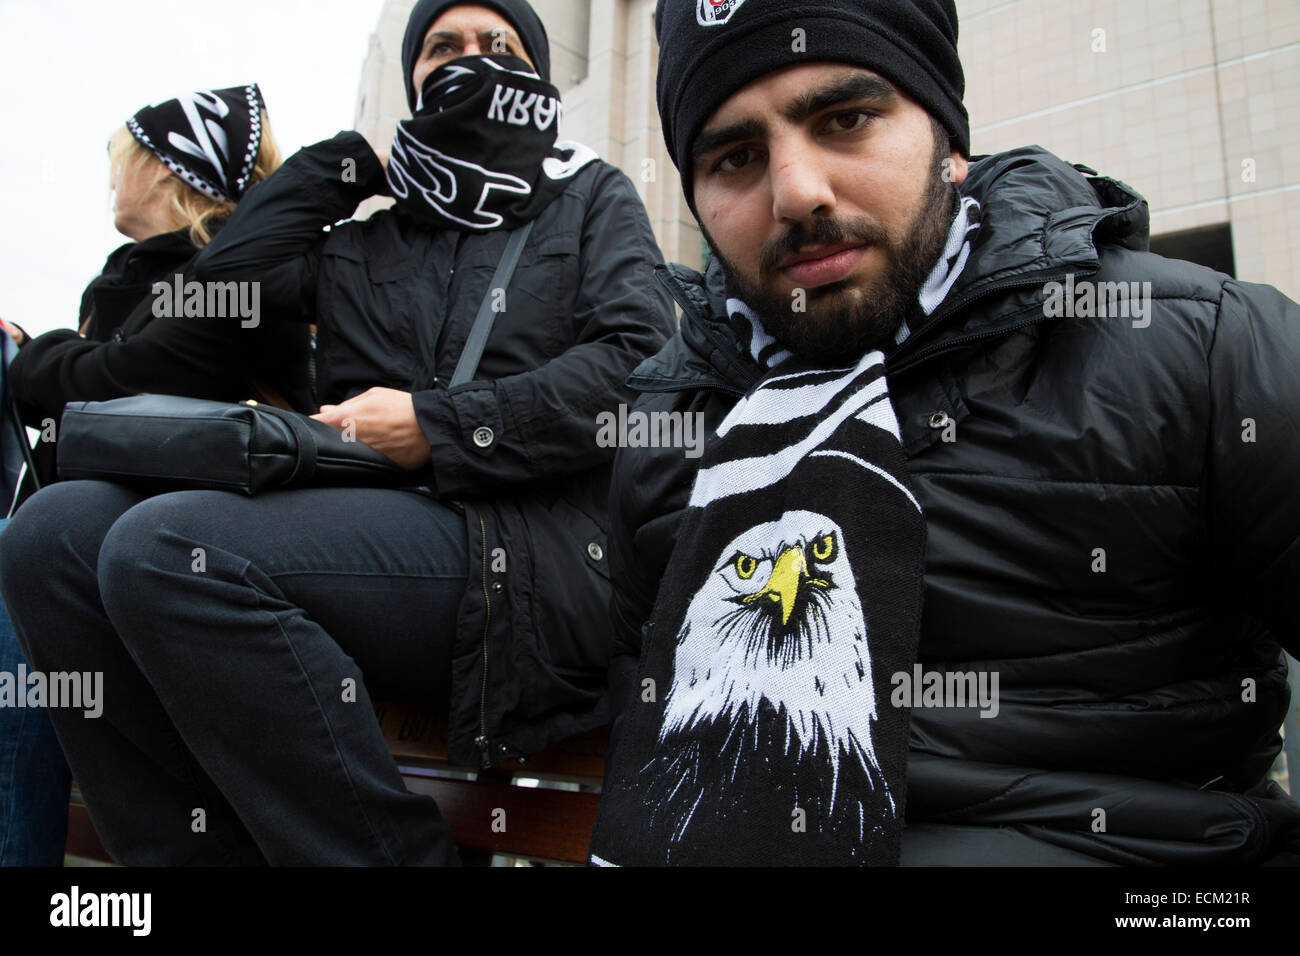 Caglayan, Istanbul, Turkey, 16th Dec, 2014. Fans of Besiktas soccer club, commonly called Carsi (marketplace), cheer in front of Caglayan courthouse in Istanbul as 35 members of the fanclub is on trial on allegations of a coup d'etat attempt during Gezi Park protests in Summer of 2013. Credit:  Bikem Ekberzade/Alamy Live News Stock Photo